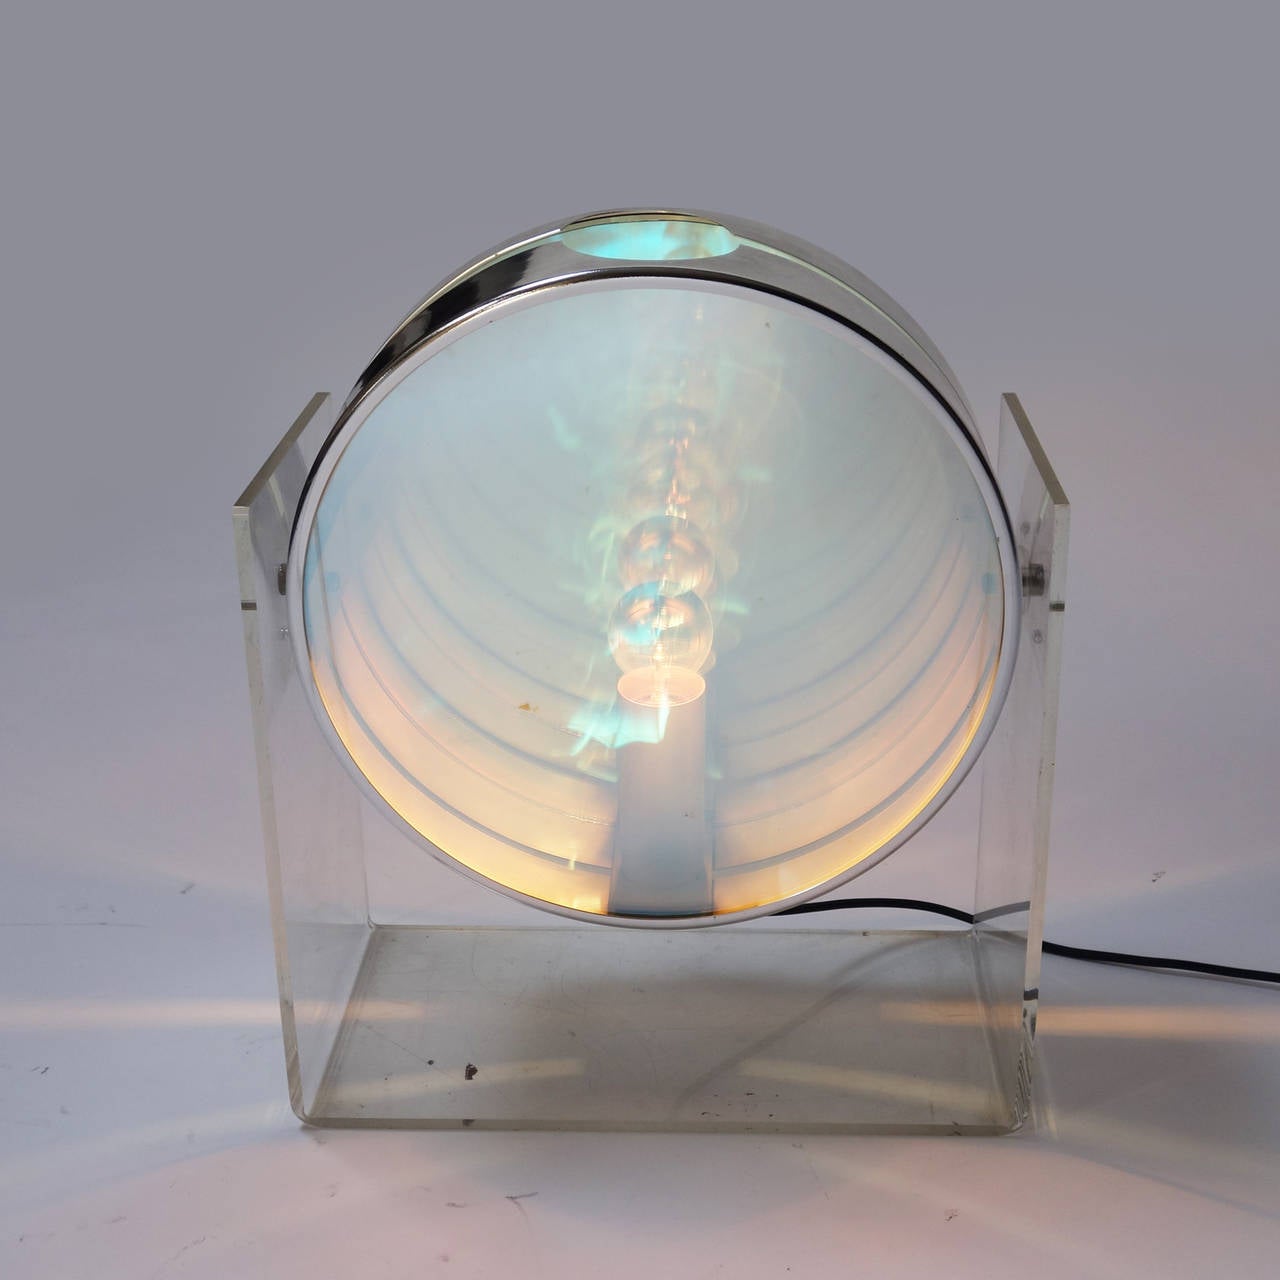 Table lamp featuring an acrylic structure with double-sided mirror case and chromed metal fittings. 

Once turn on, the light create a infinite tunnel effect.